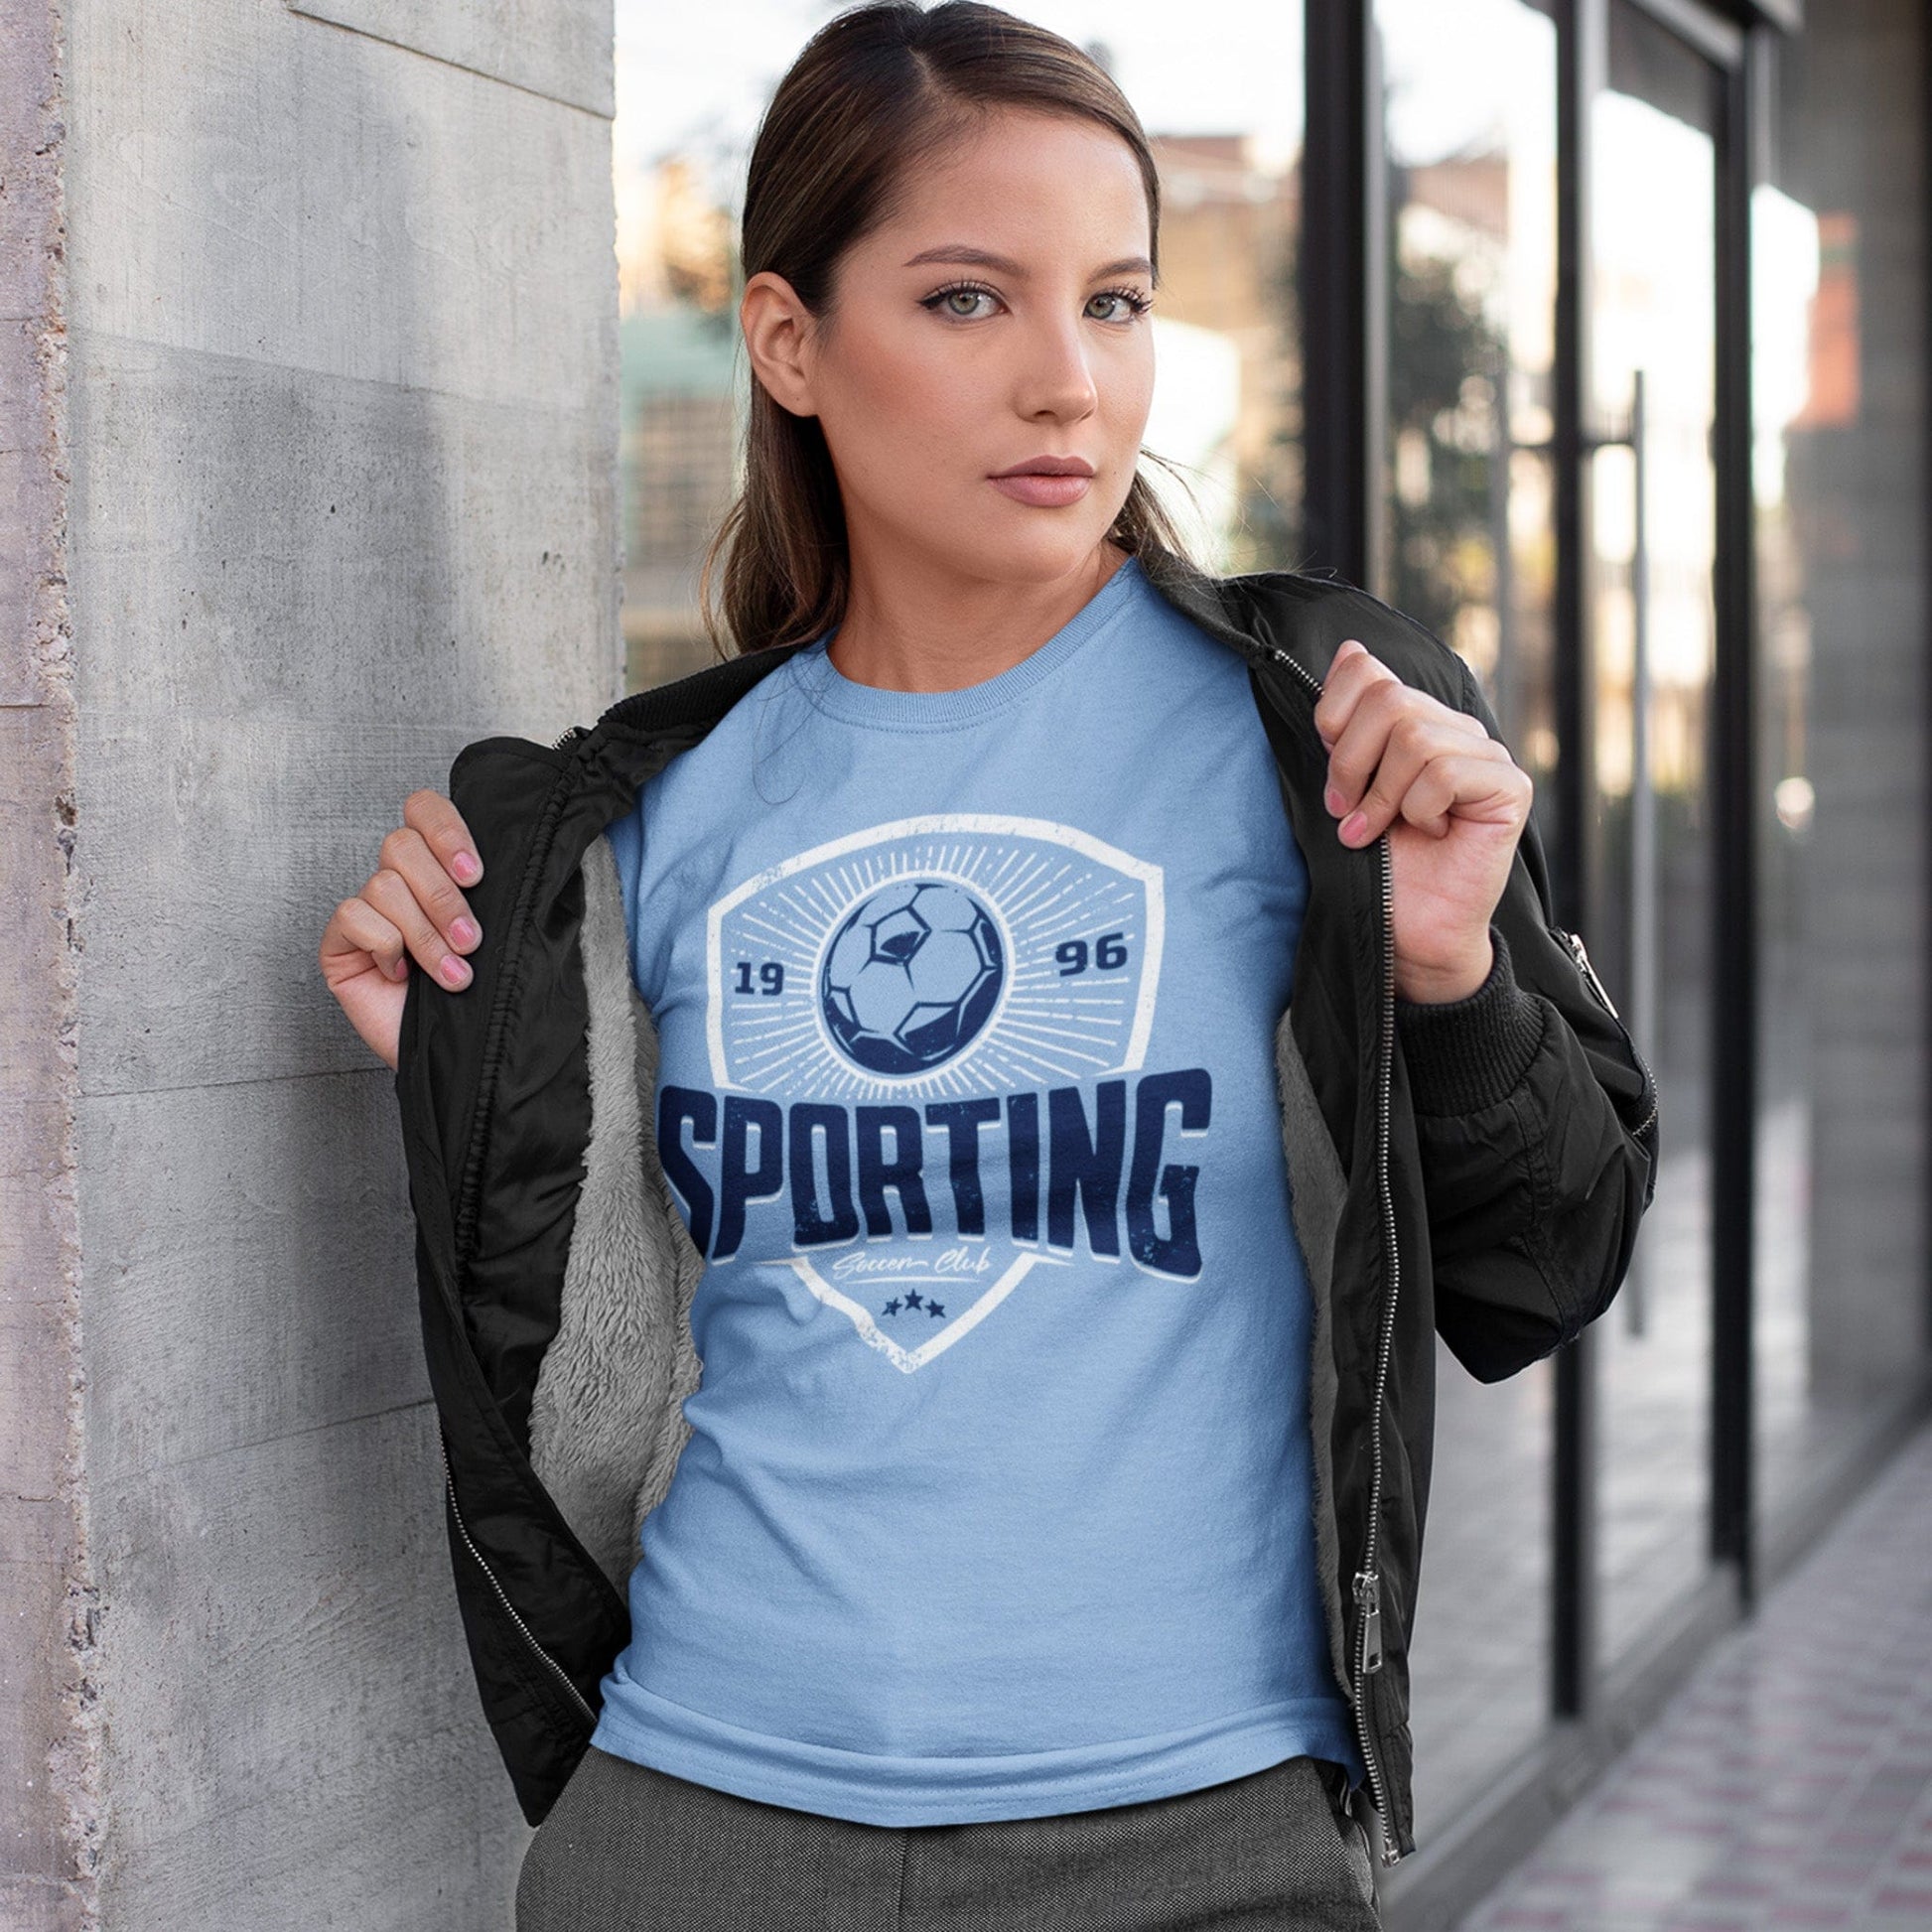 KC Swag Sporting Kansas City navy, powder, white SPORTING CLUB on baby blue unisex t-shirt worn by female model under bomber jacket leaning on concrete wall